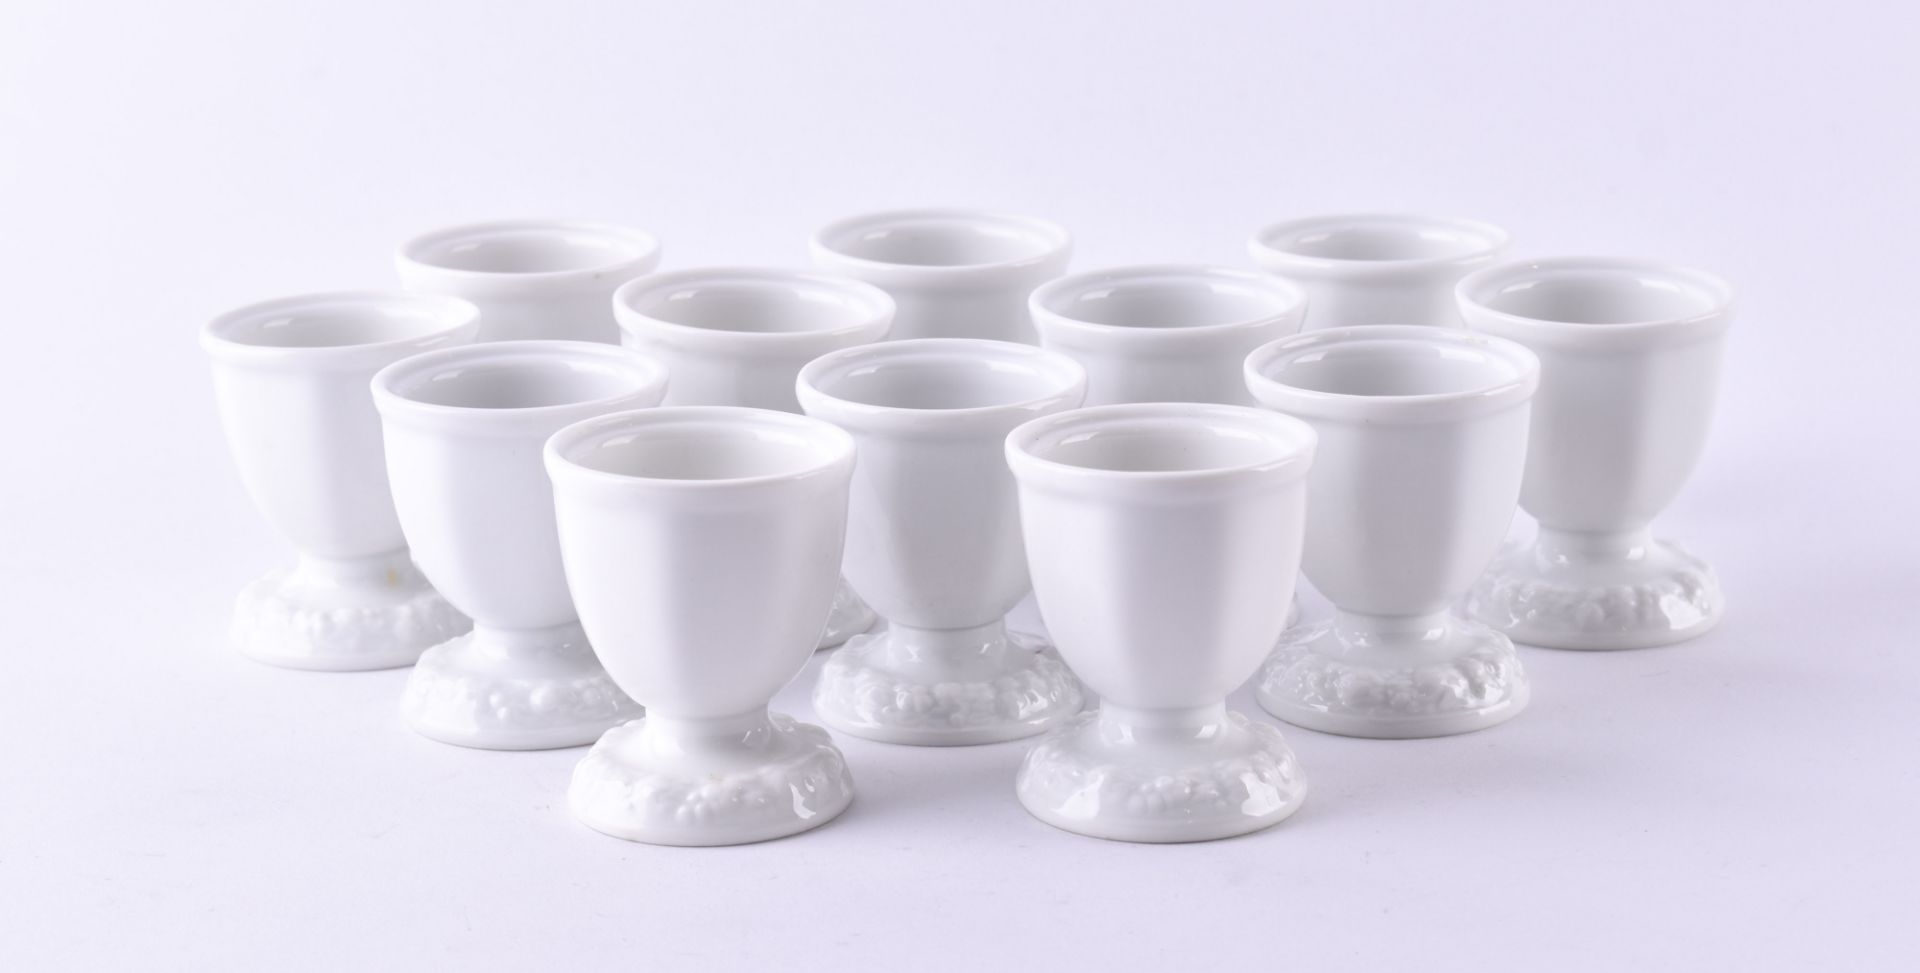 12 egg cups Maria classic Rose White, Rosenthal - Image 2 of 3